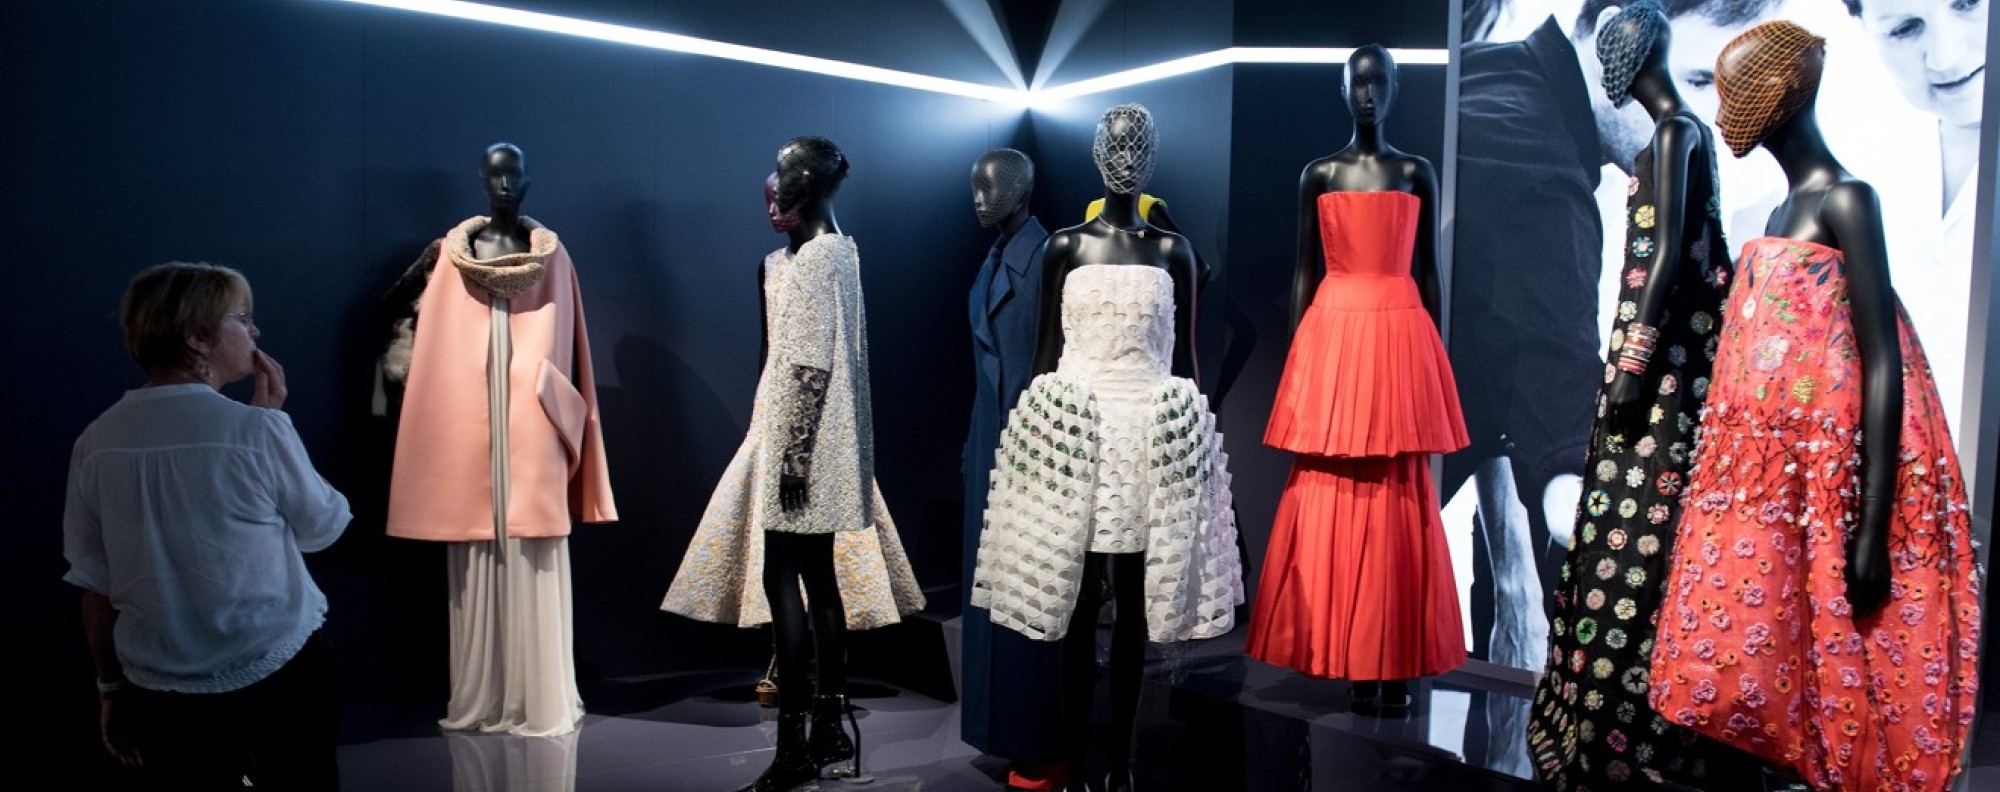 Christian Dior: From Paris to the World Exhibit & Inspiration - Sulky